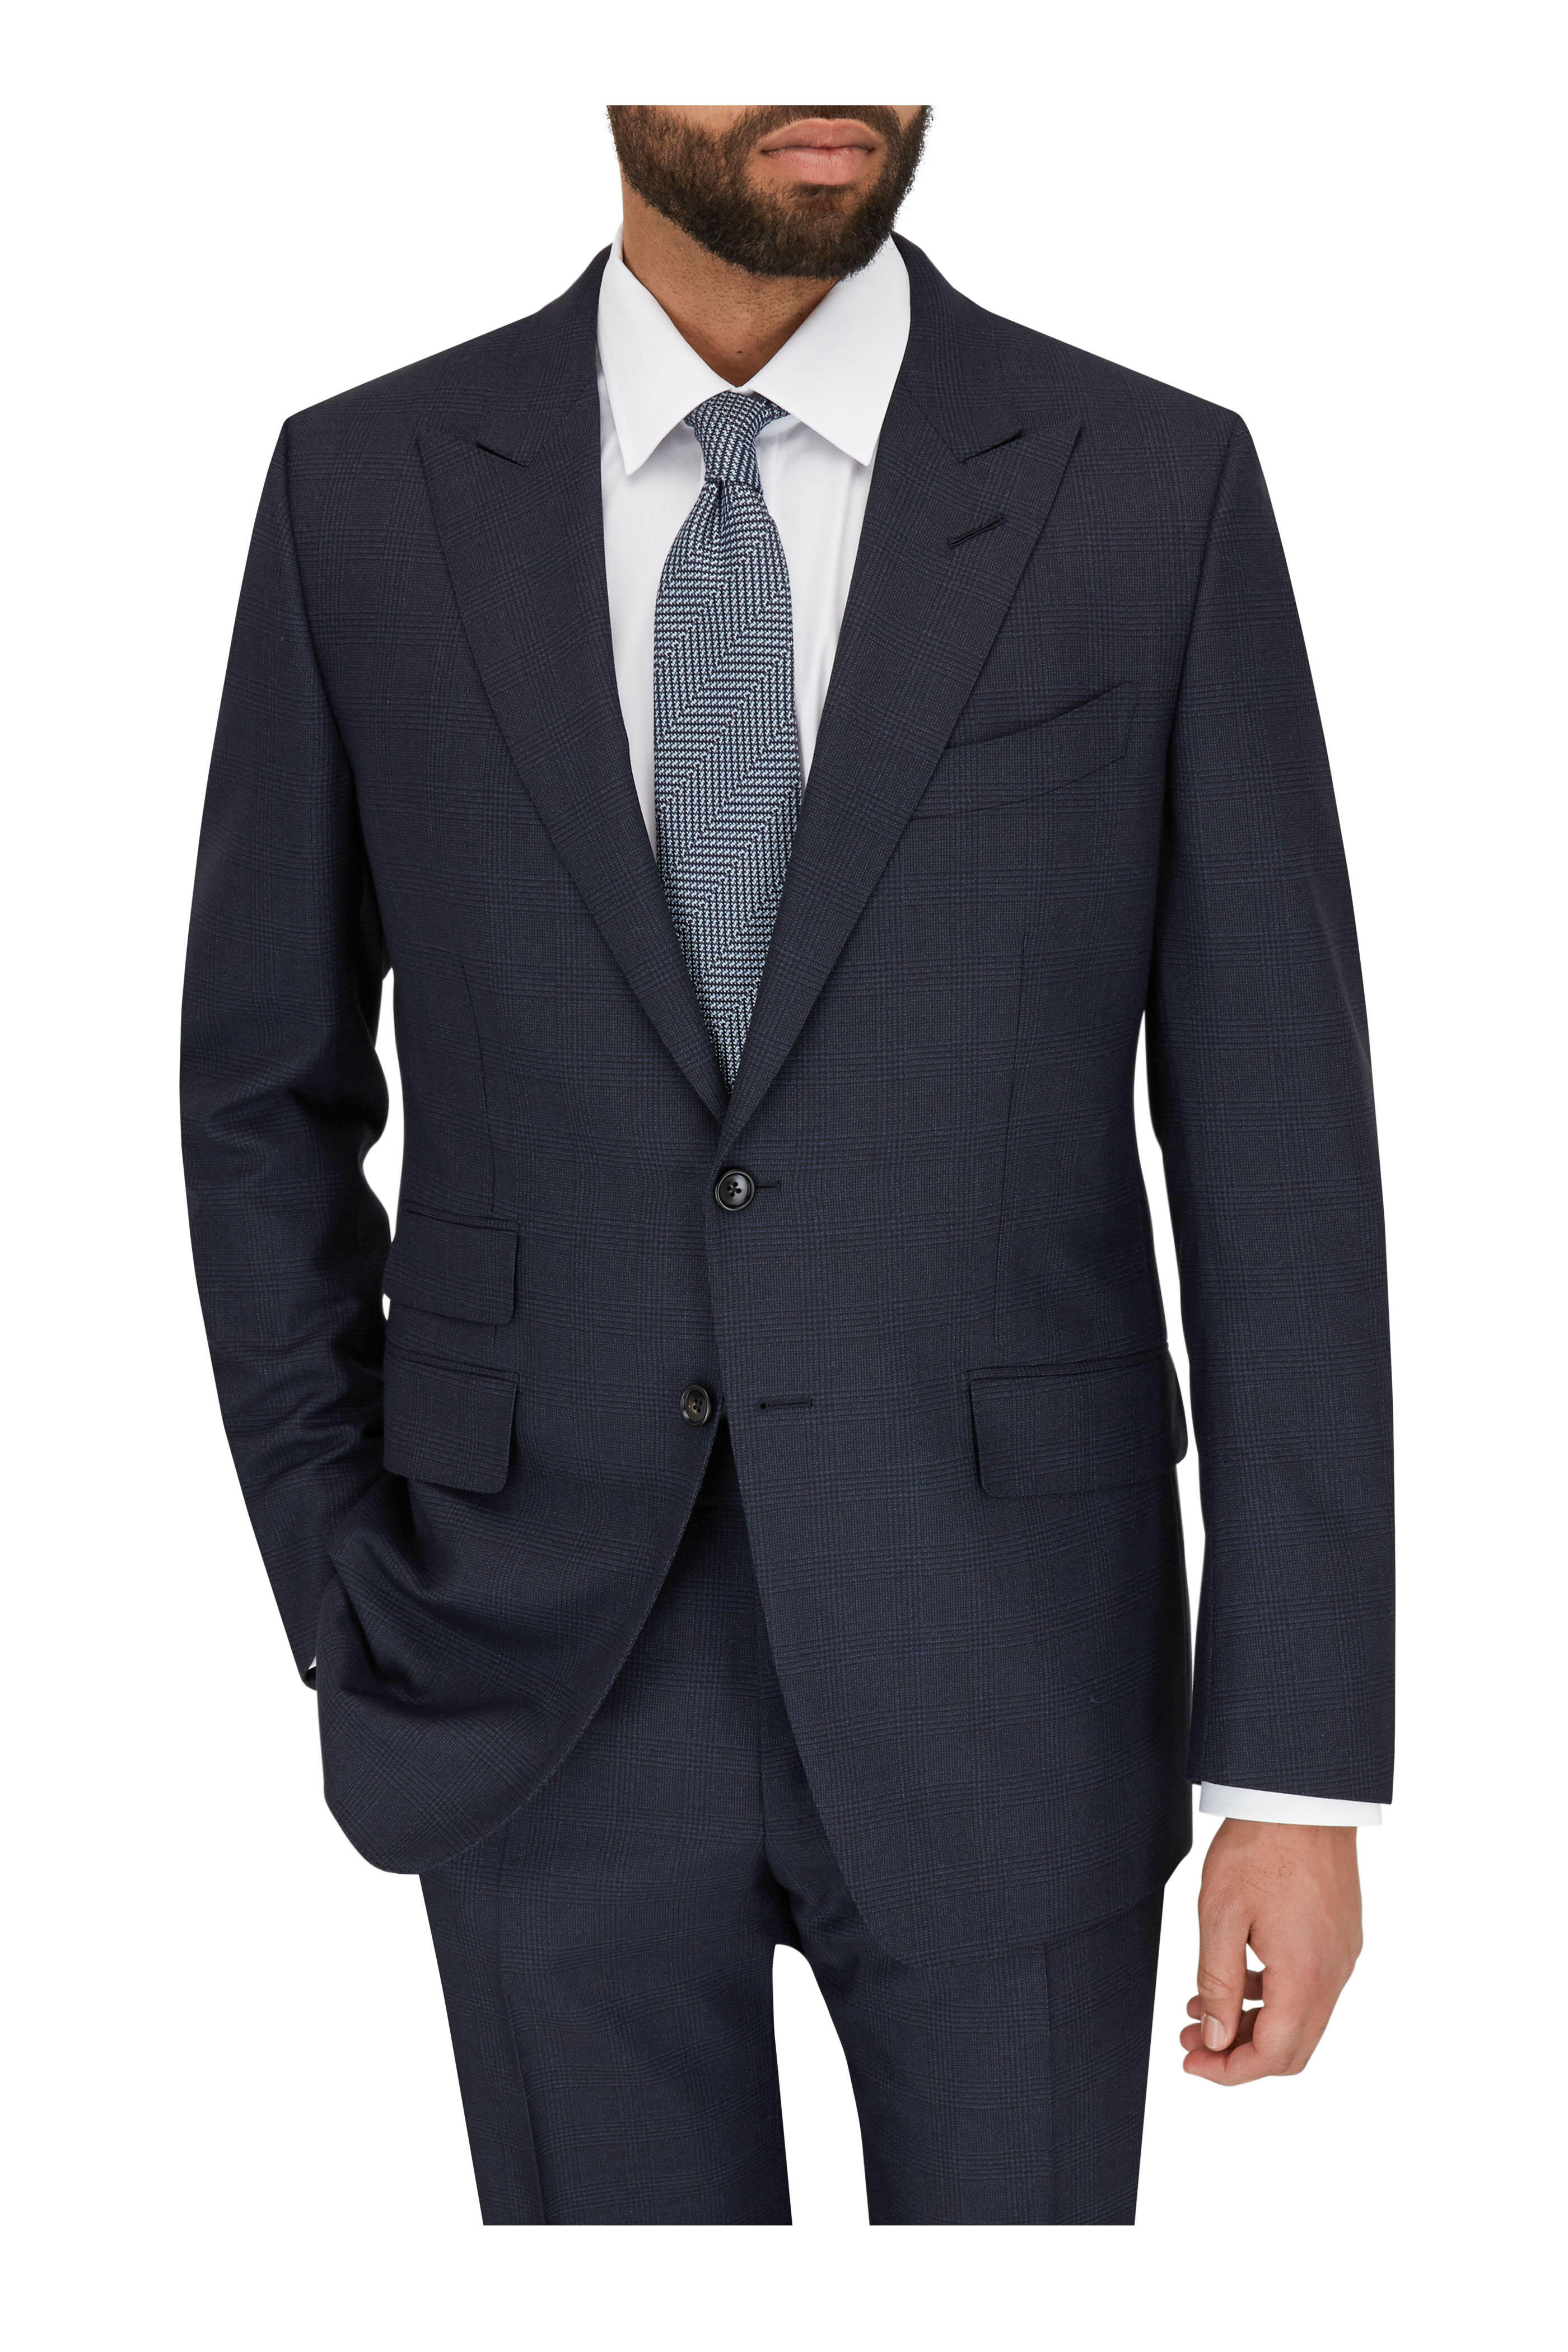 Tom Ford - O'Connor Navy Prince of Whales Peak Lapel Suit